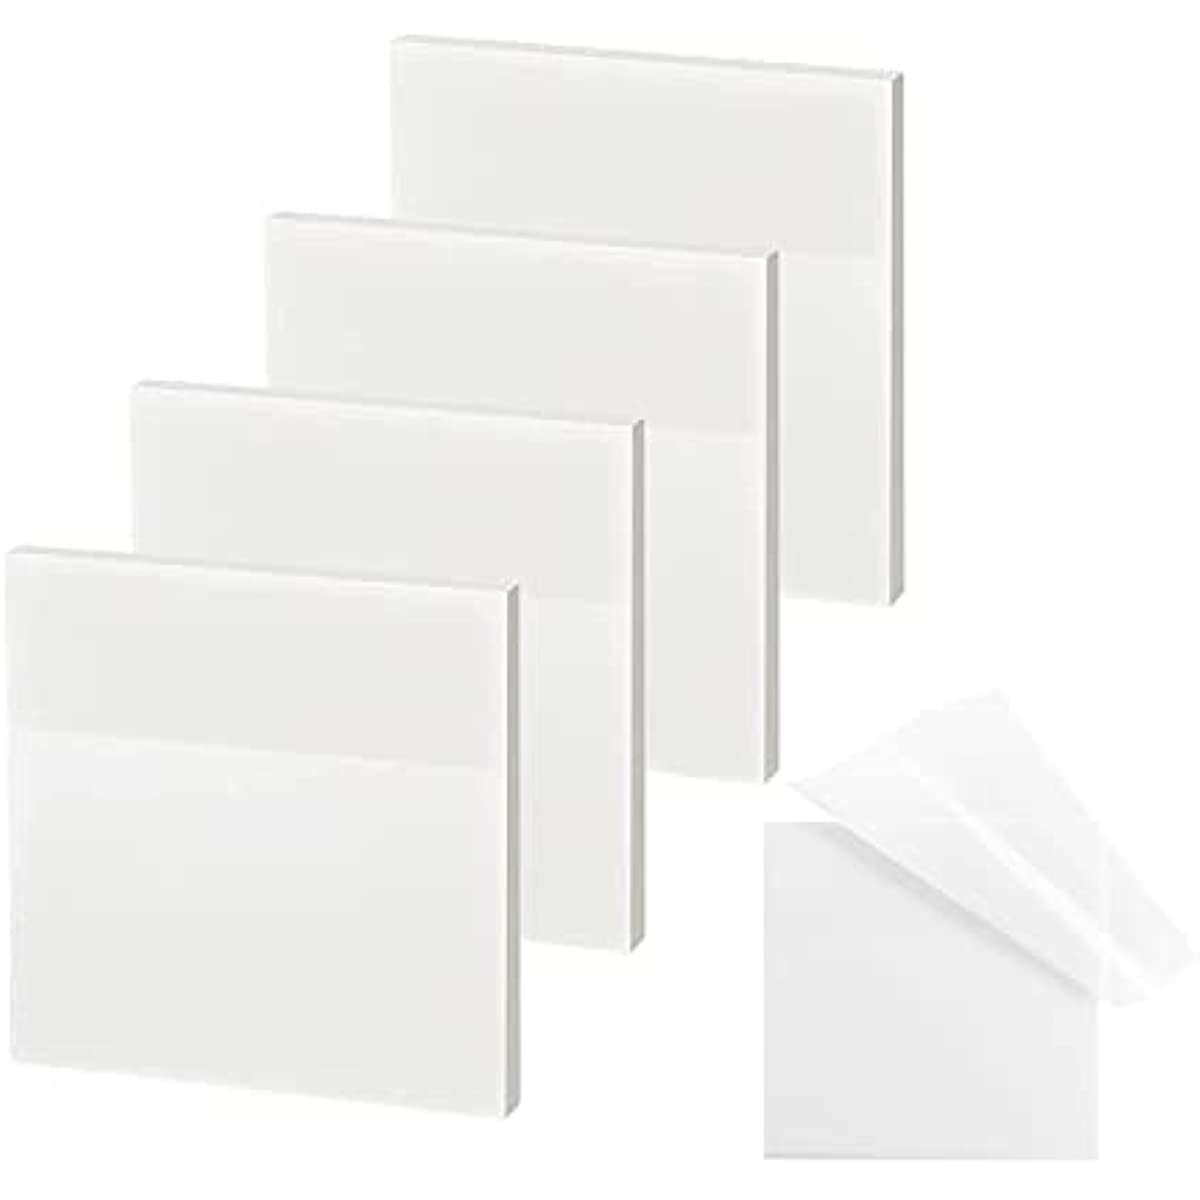 600PCS Transparent Sticky Tabs, 25 x 76 mm Coloured Index Tabs Post It  Notes Self-Stick Note Pads, Translucent Sticky Note Memo Message Reminder  Notes